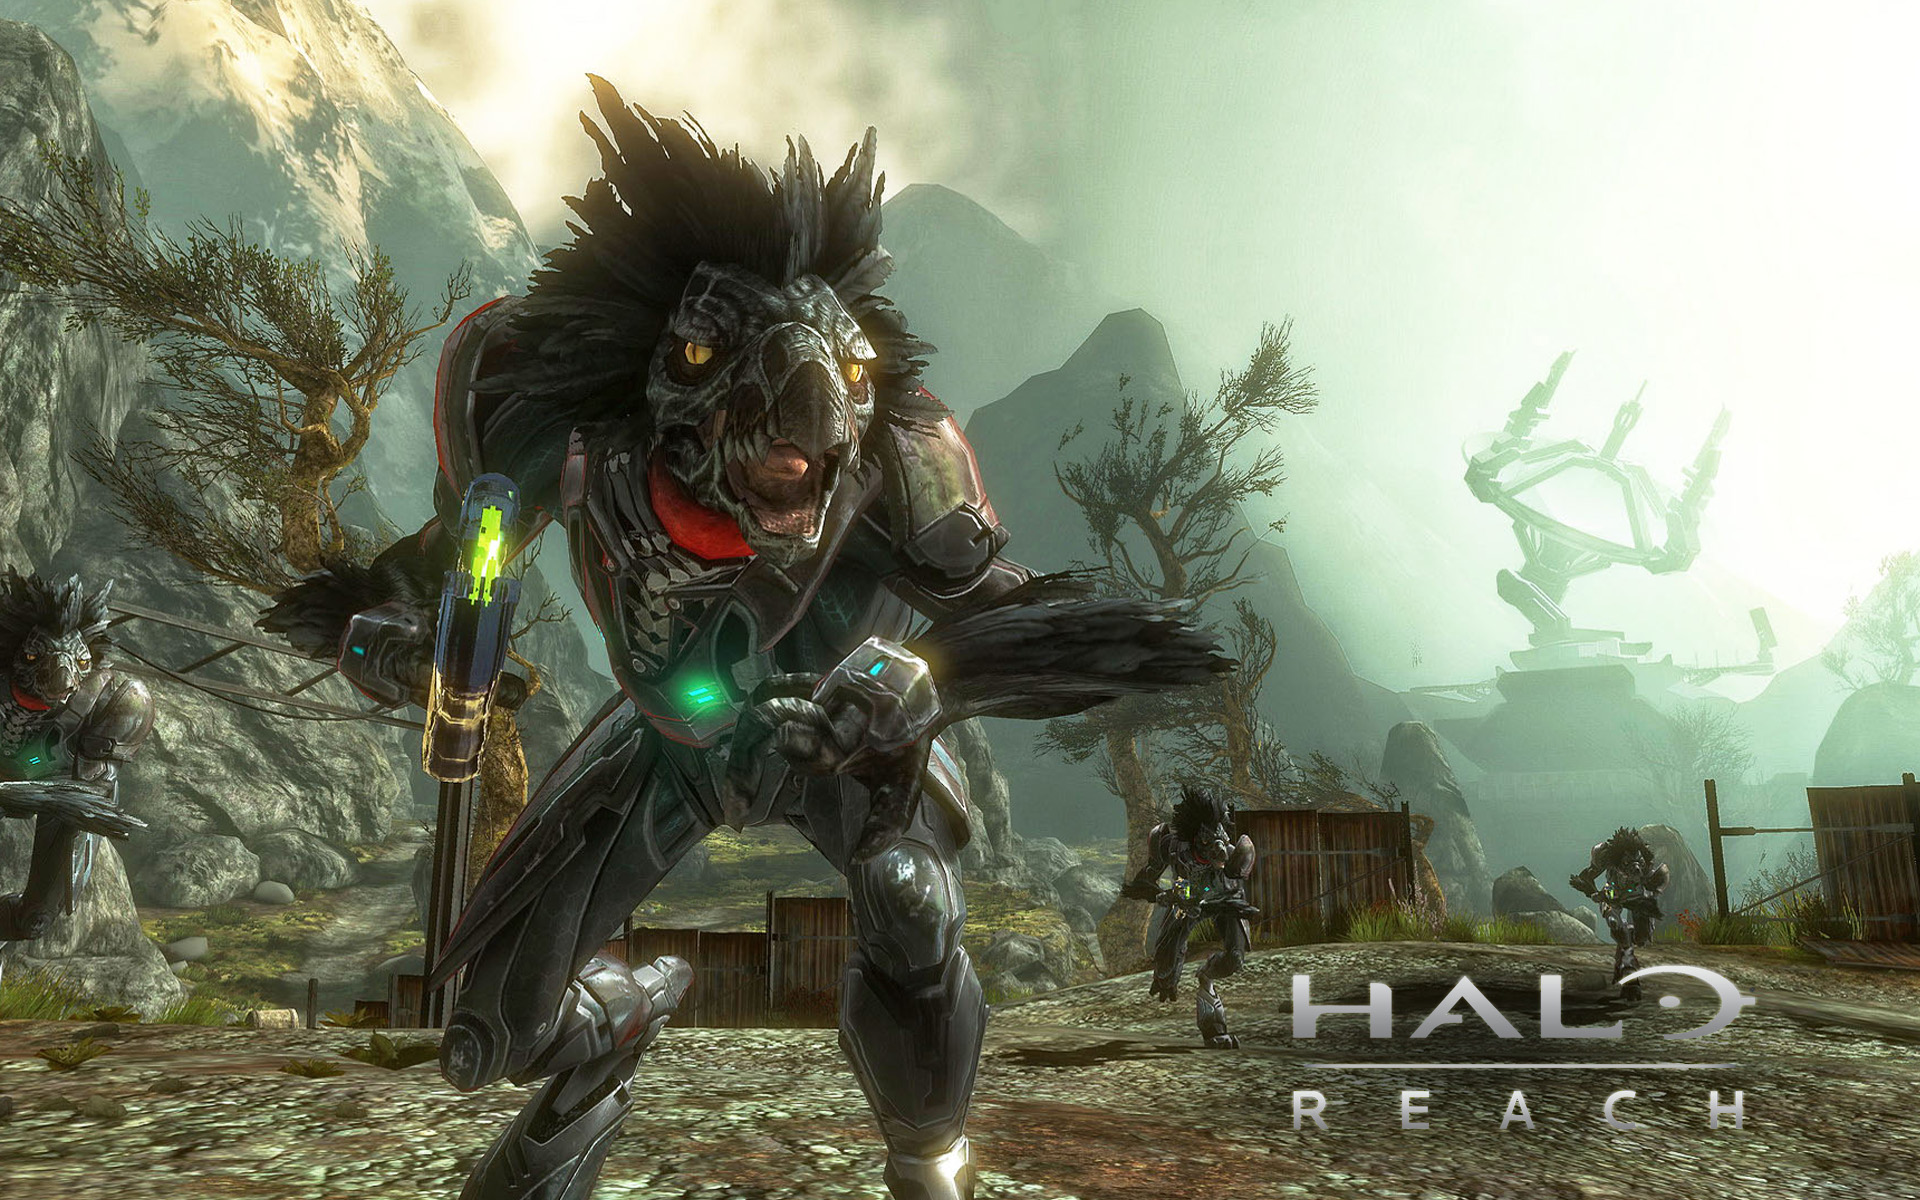 Remember Halo Reach before you even play it with this nifty 1080p